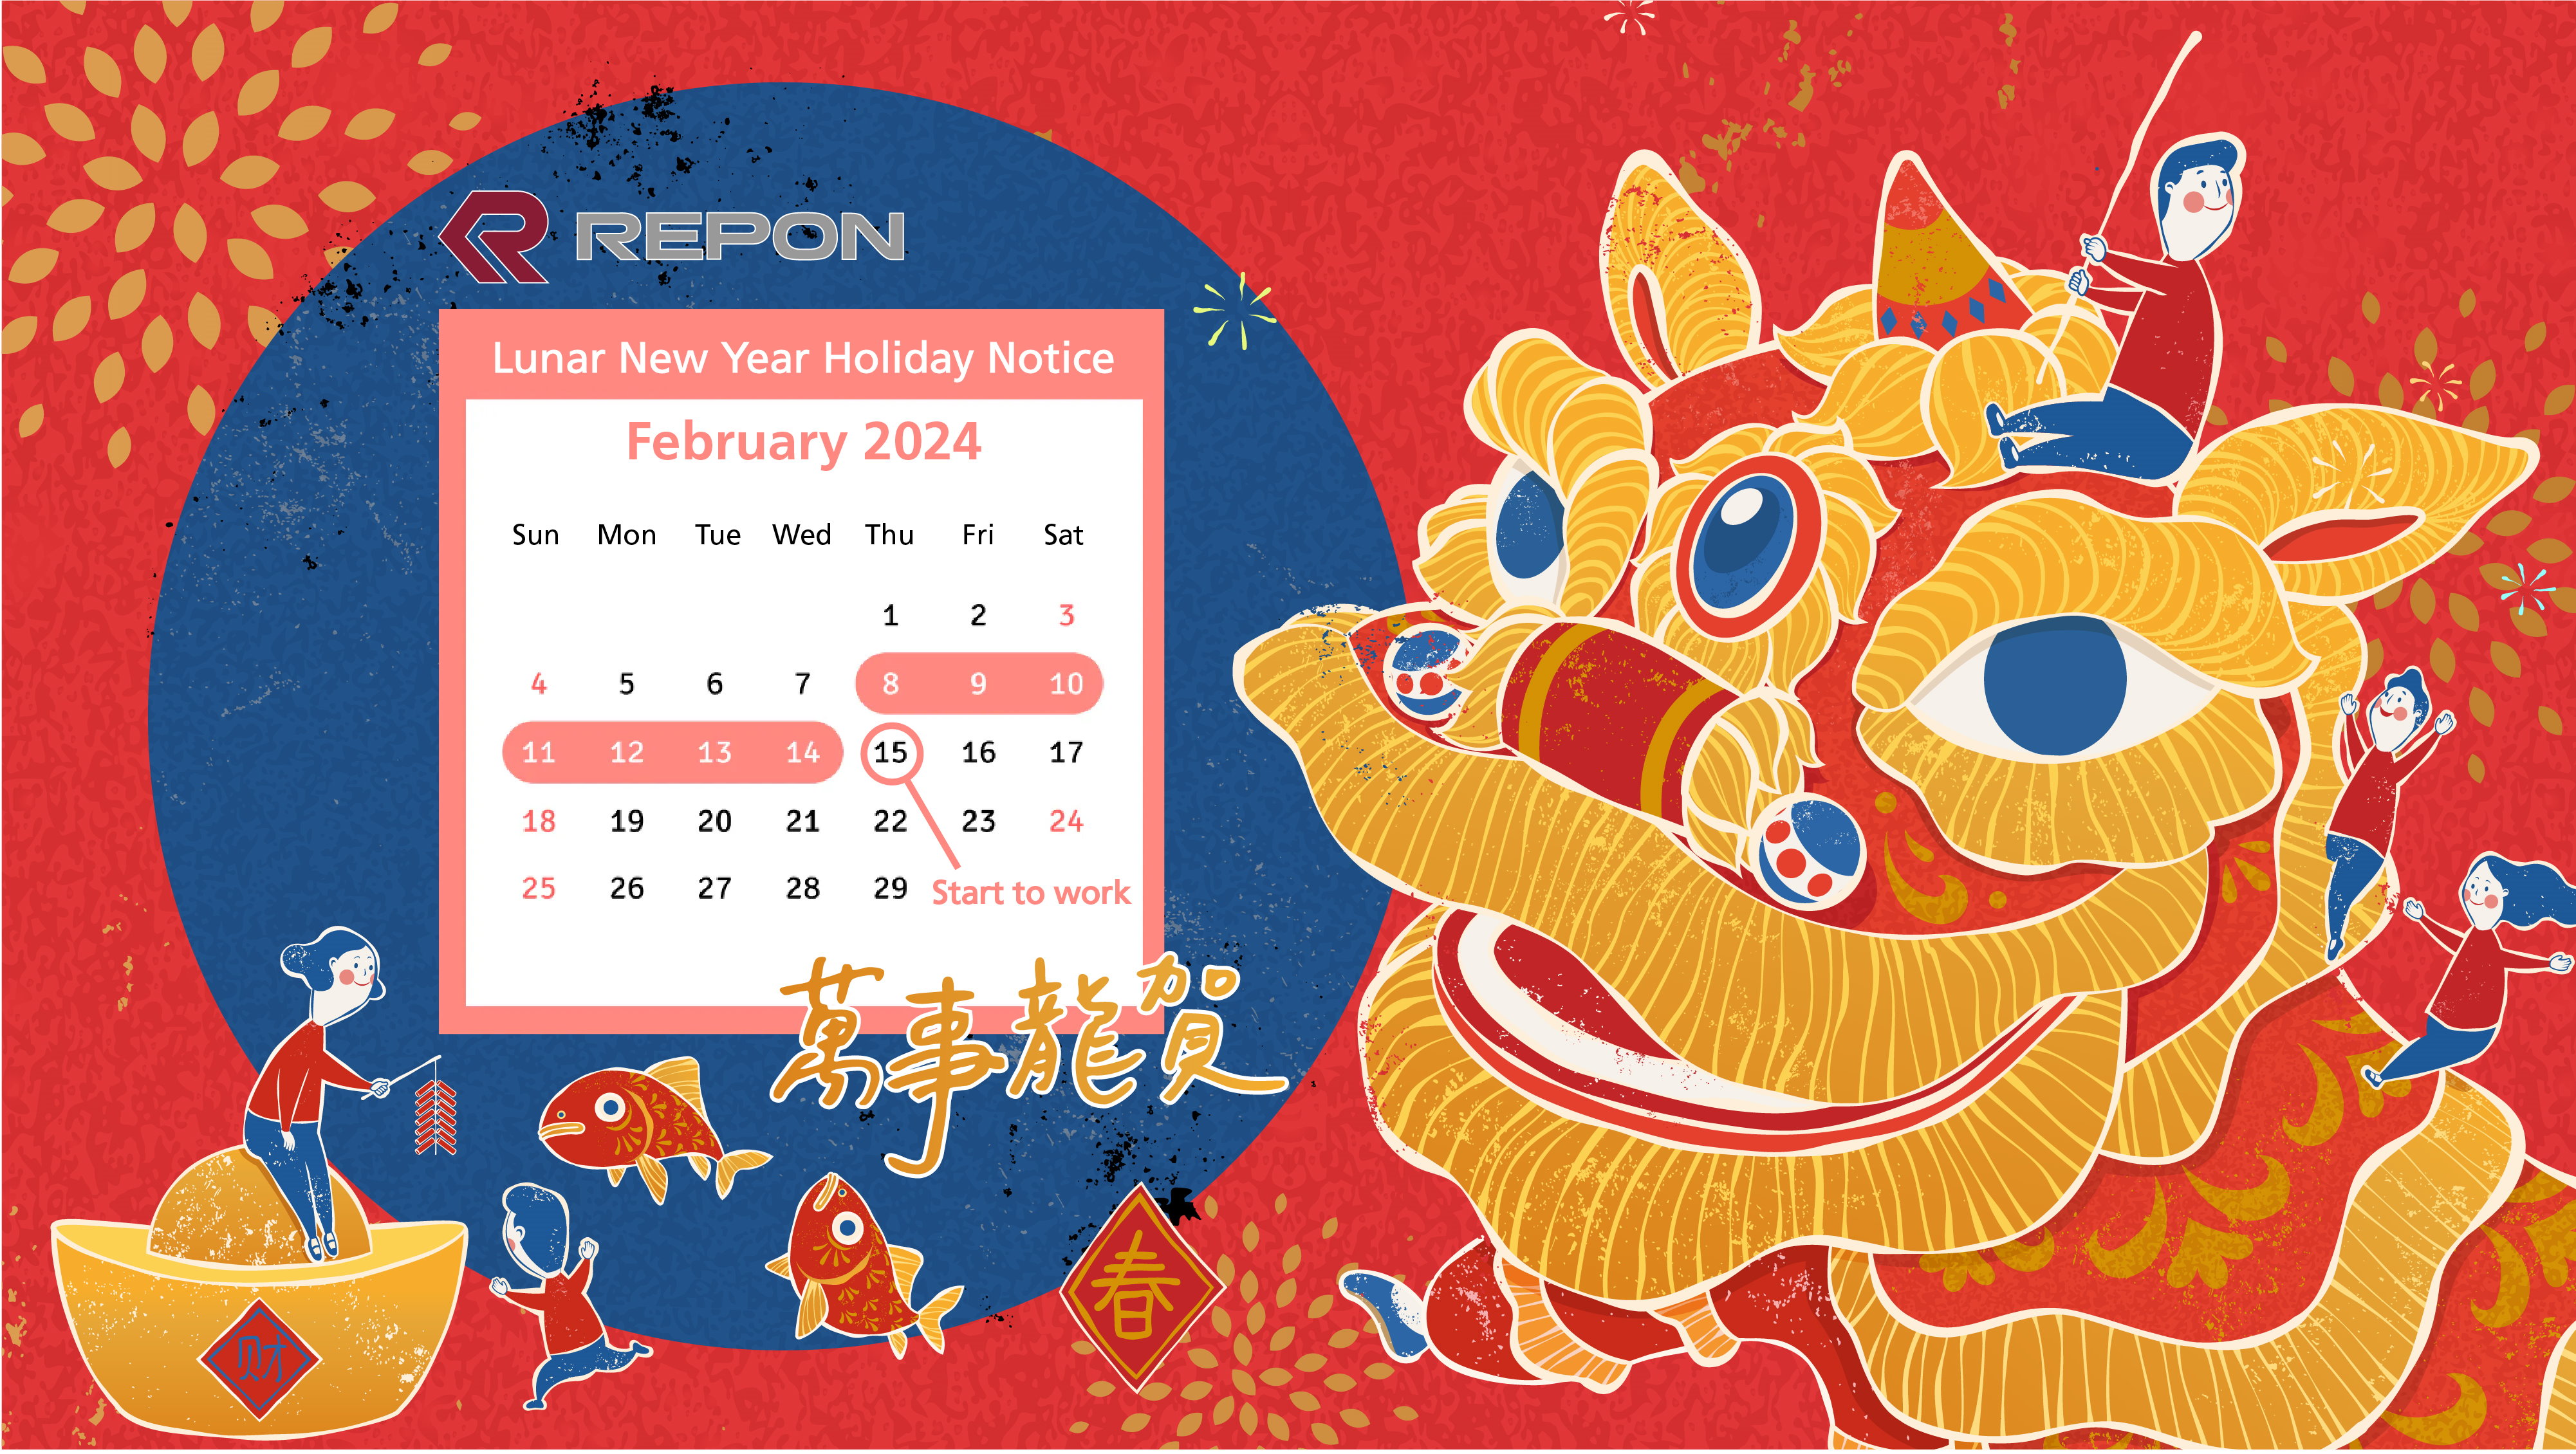 REPON 2024 Lunar New Year Holiday Notice